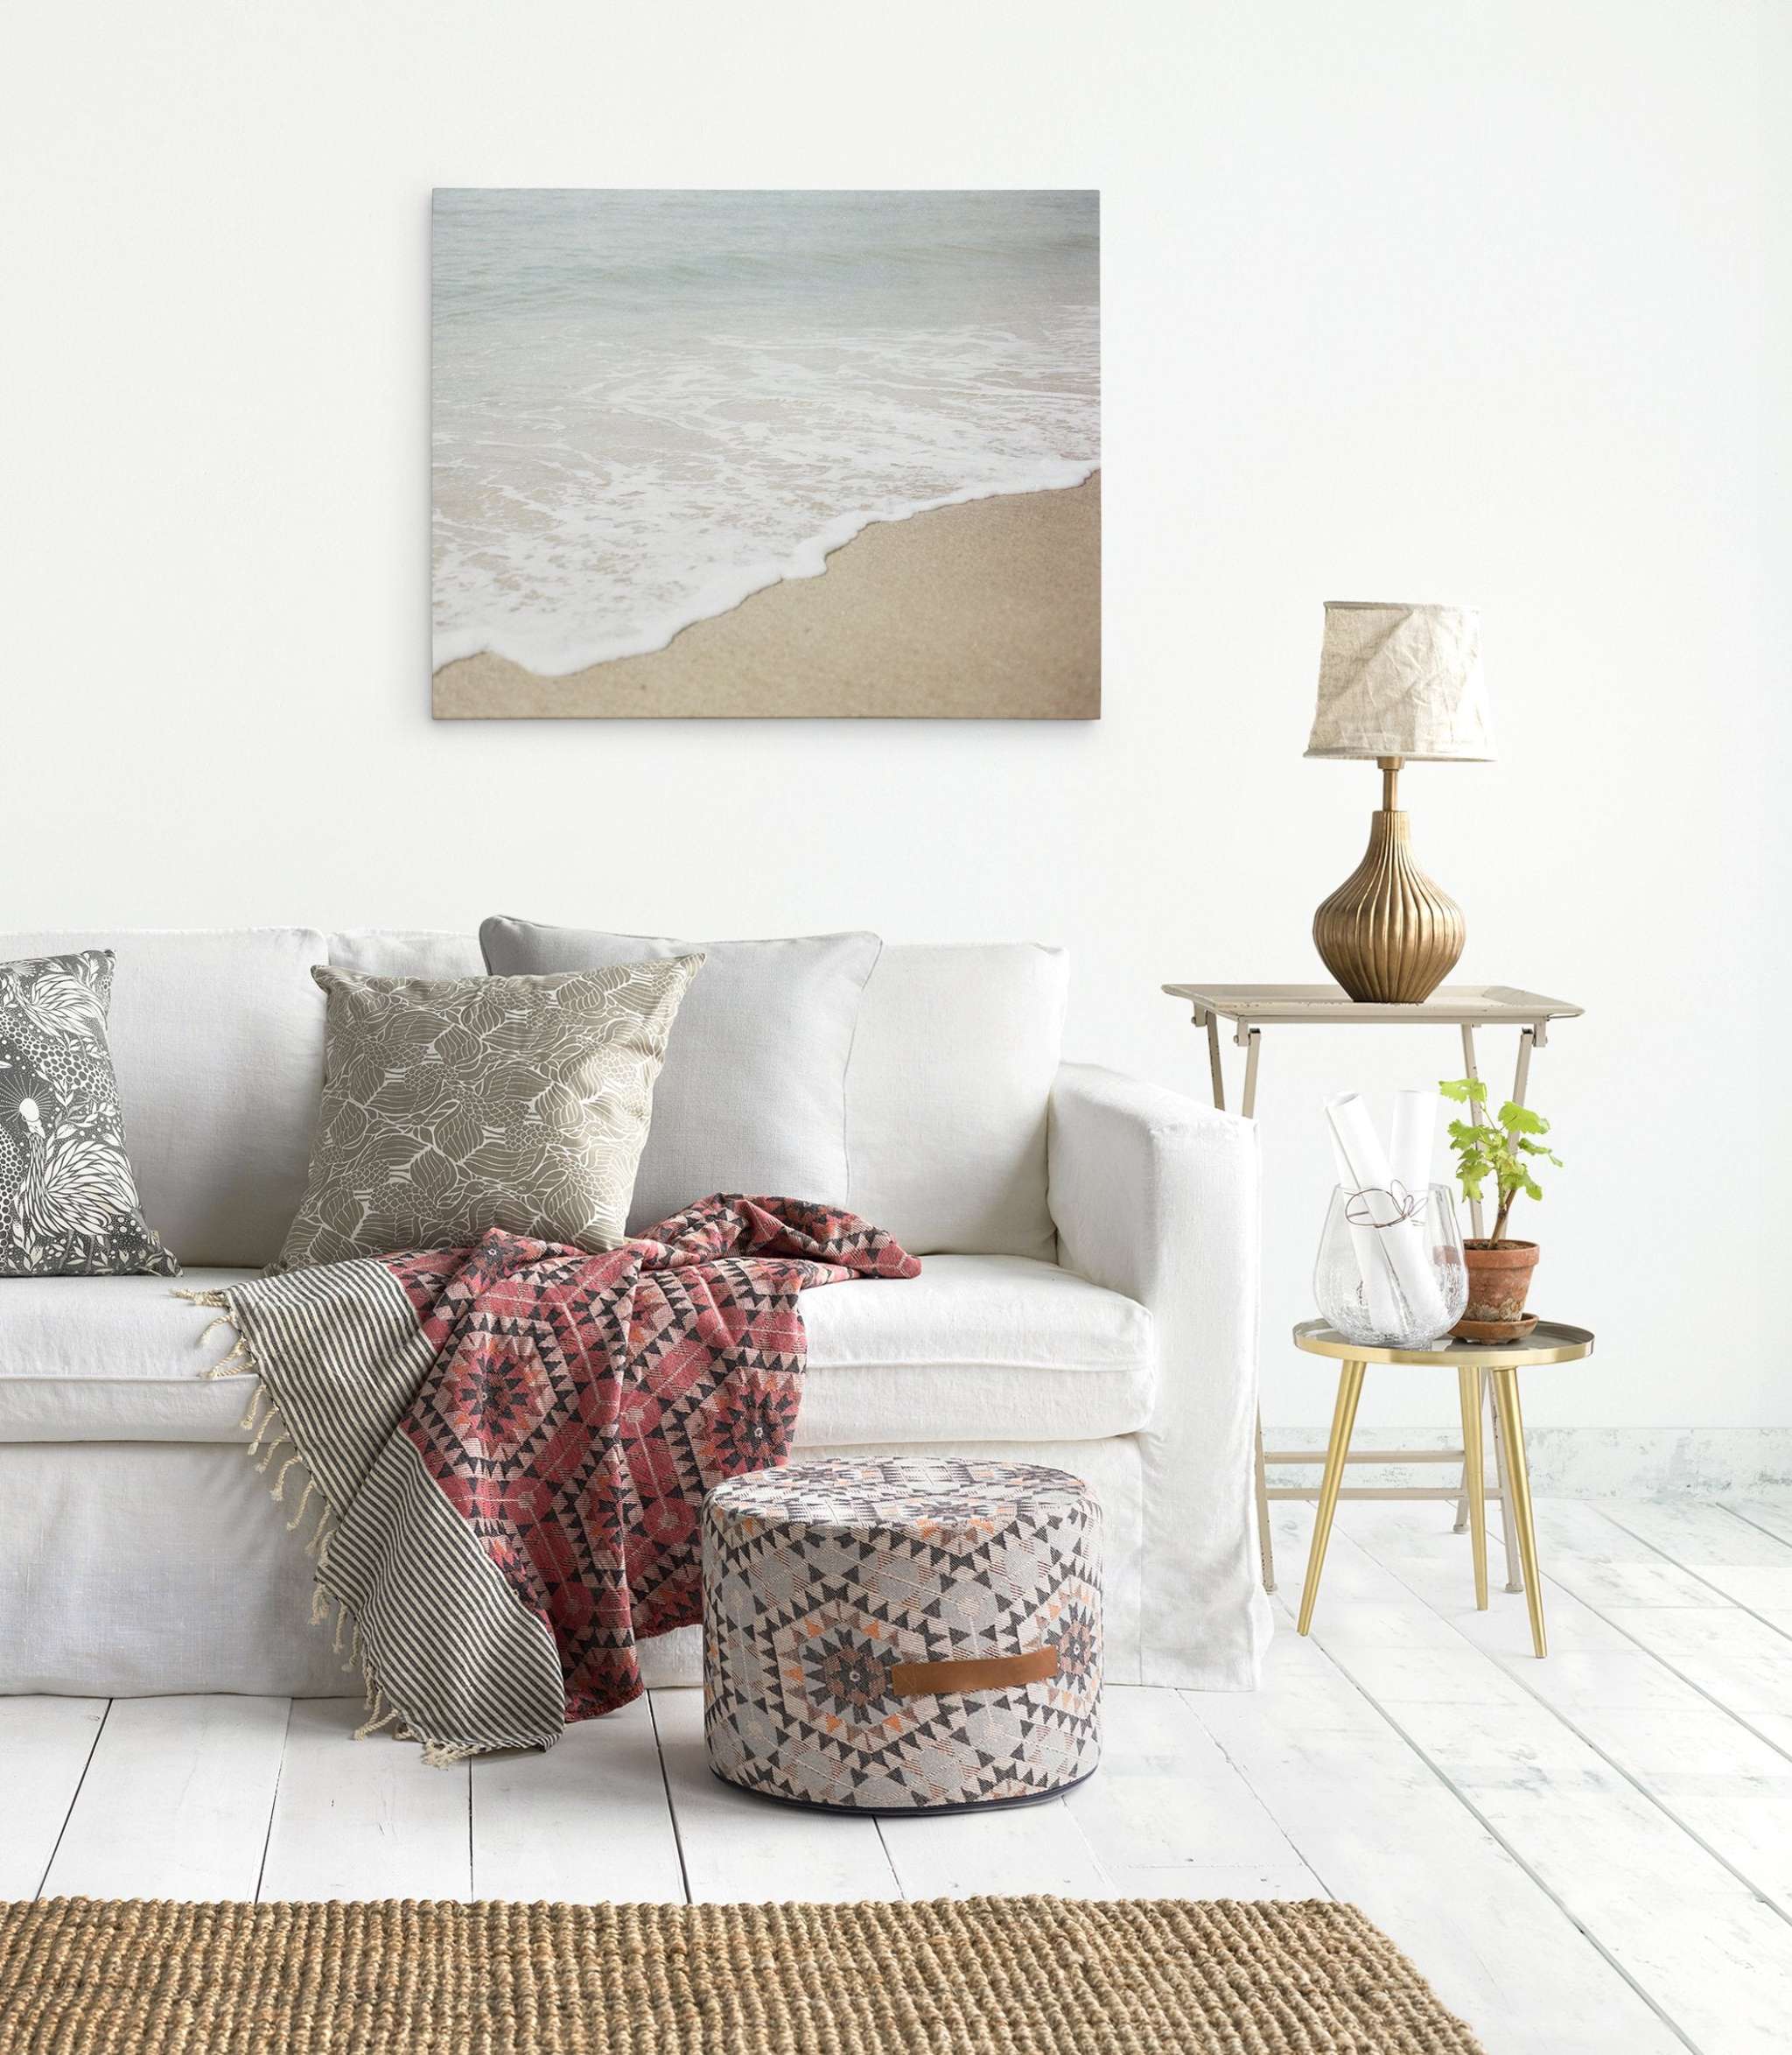 A bright living room features a white sofa with patterned cushions and a colorful throw. In front sits a patterned pouf. A side table holds a decorative lamp, a glass vase, and a potted plant. Above the sofa, an Offley Green Beach Waves Canvas Wall Art, 'Chasing Surf' adorns the wall.